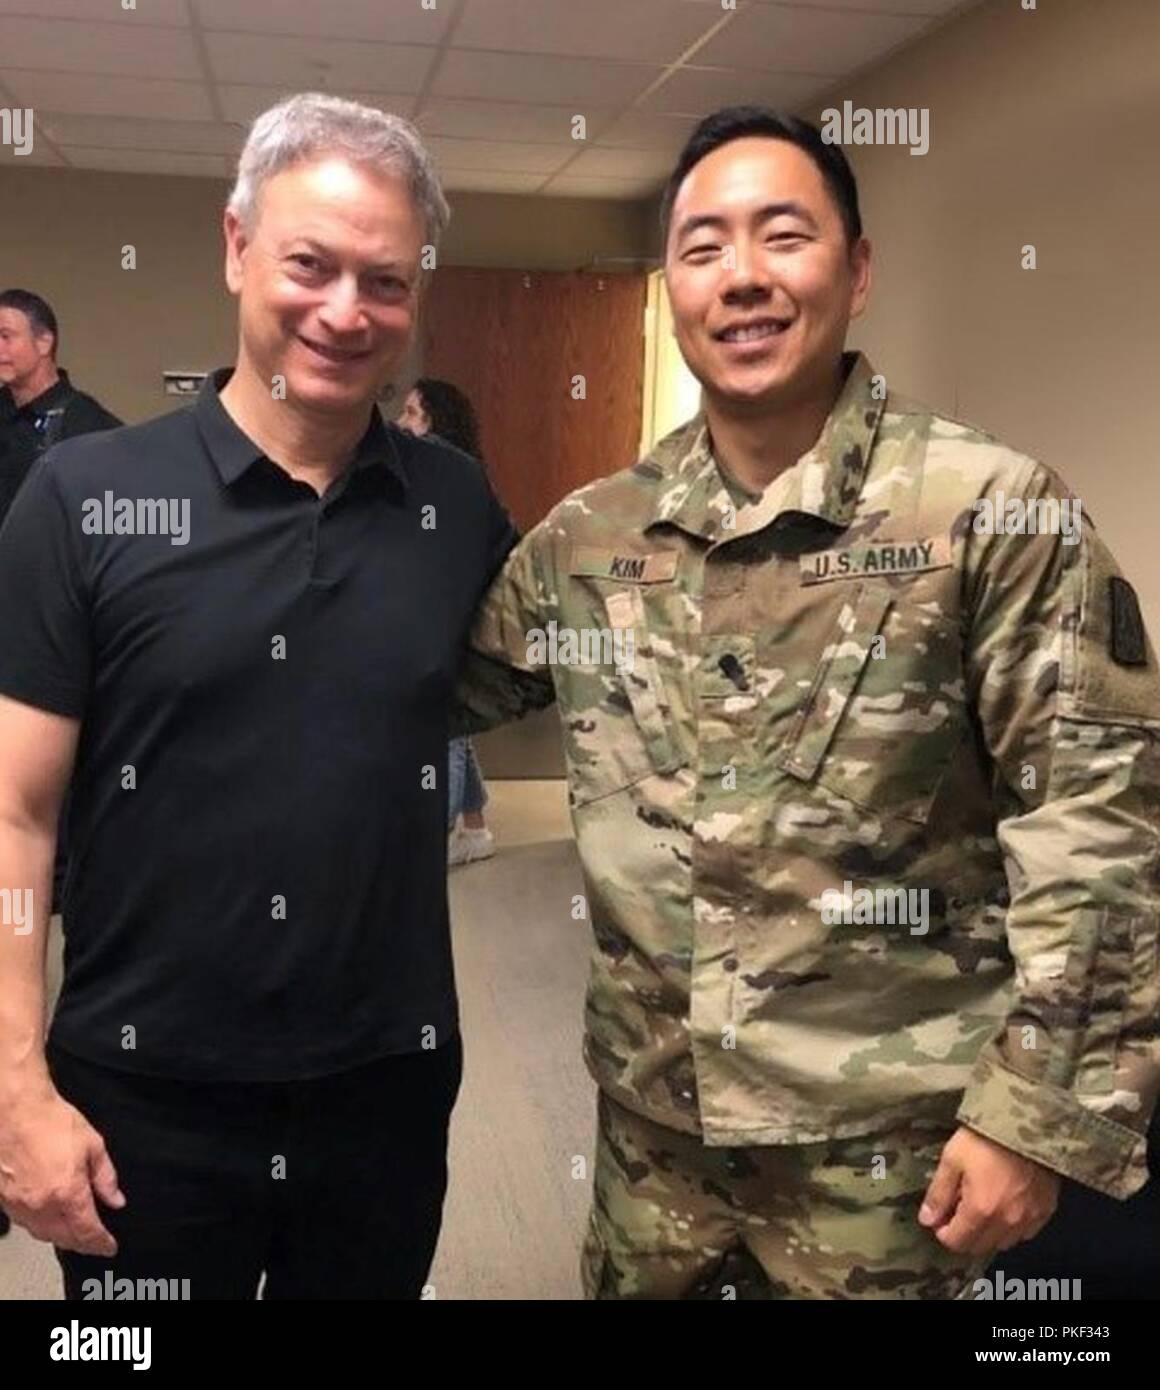 Spc. Andy Kim shares a moment with actor Gary Sinese during a visit to Brooke Army Medical Center. Stock Photo